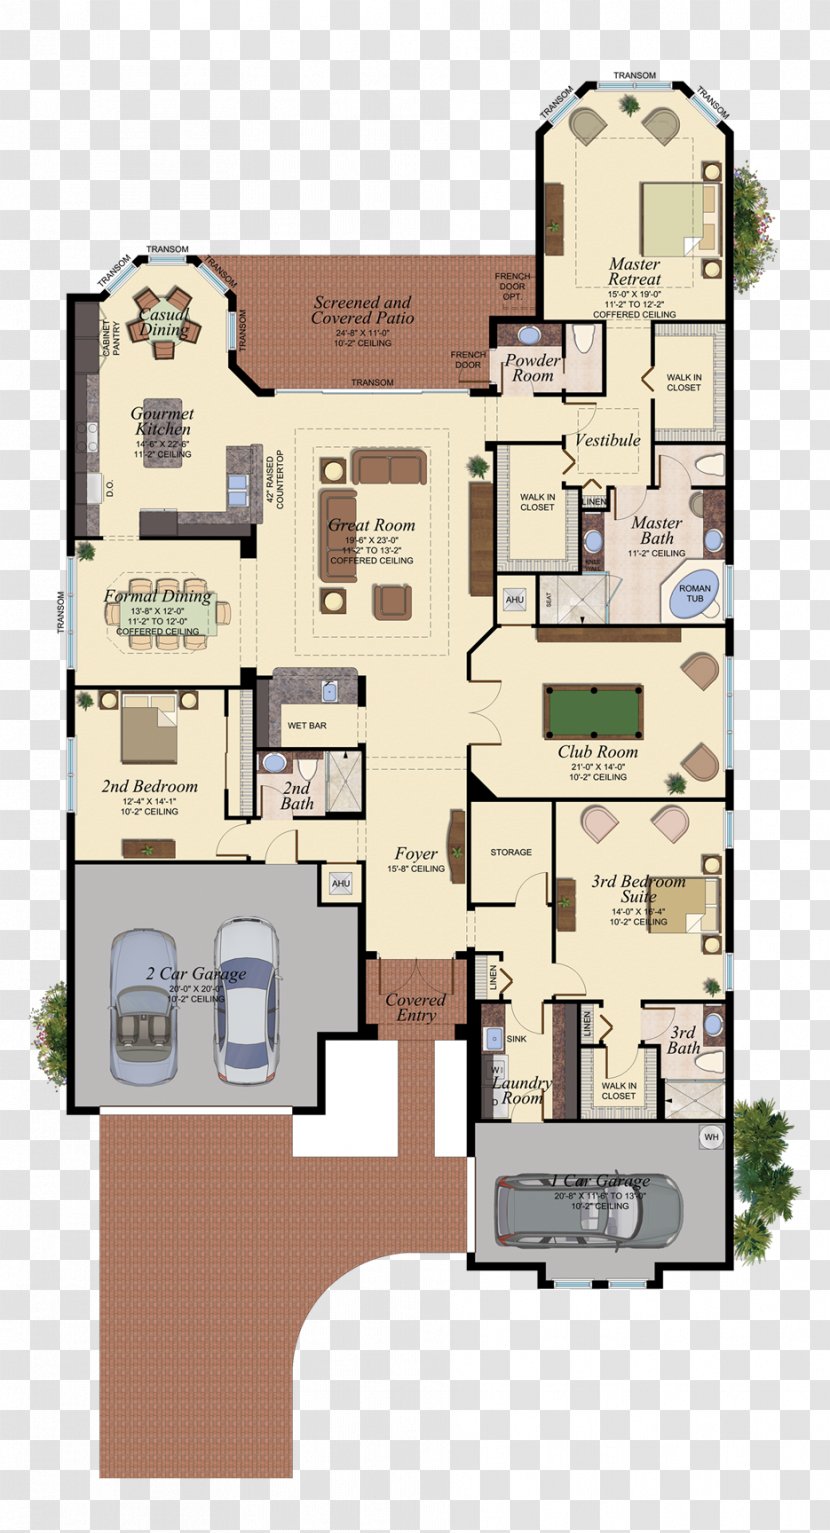 Floor Plan House G. L. Homes Of Florida Corporation - Residential Area Transparent PNG